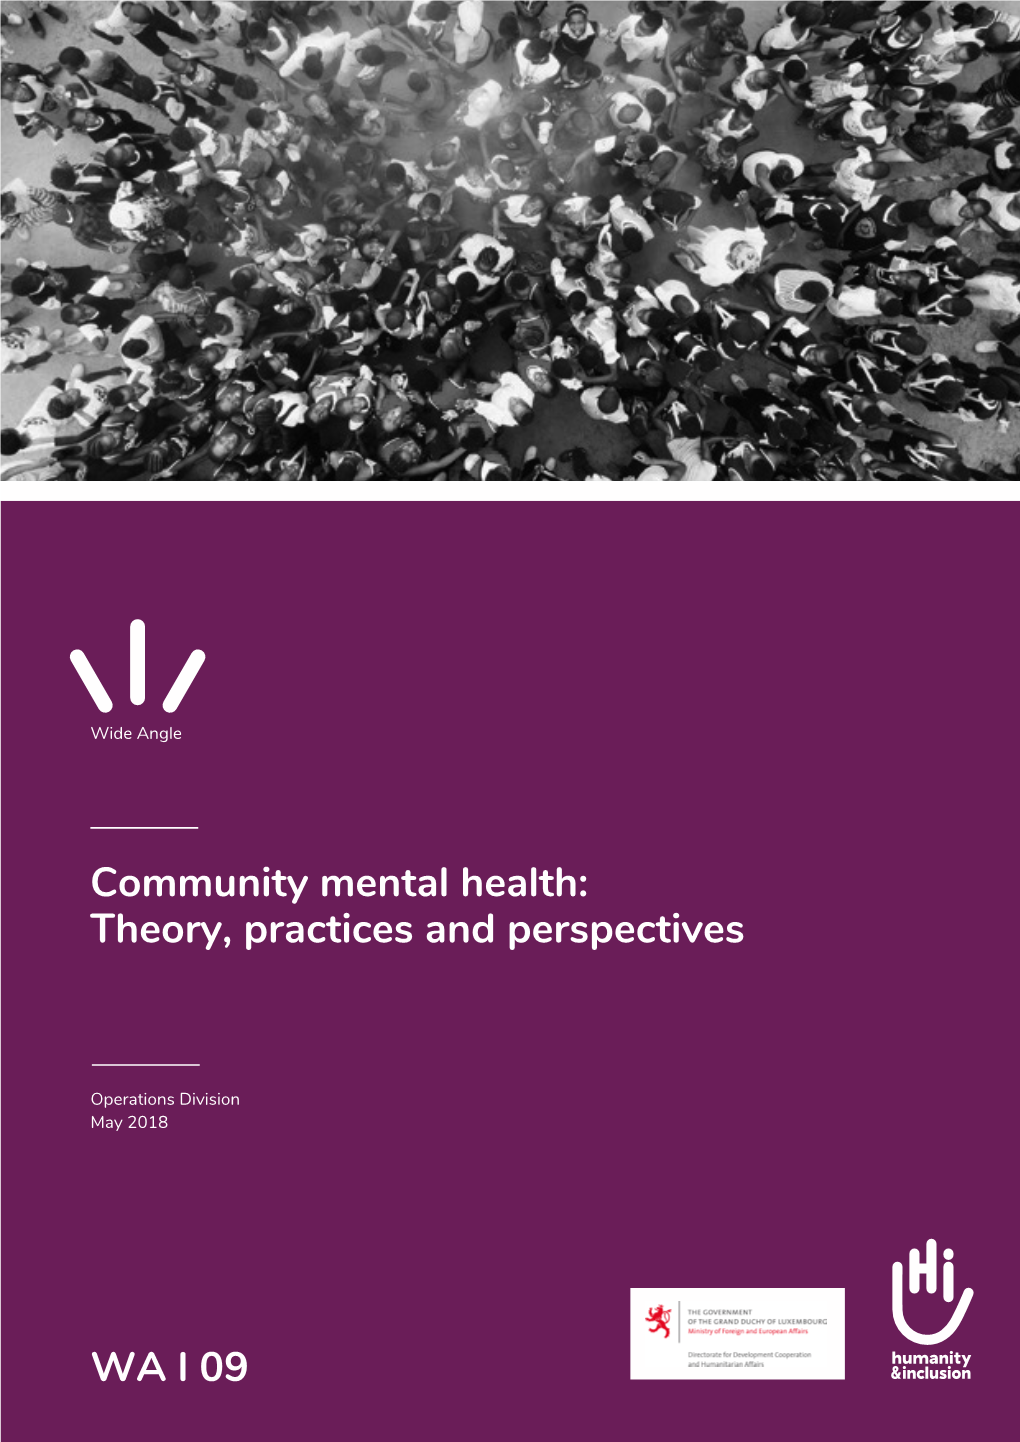 Community Mental Health: Theory, Practices, and Perspectives (2018)